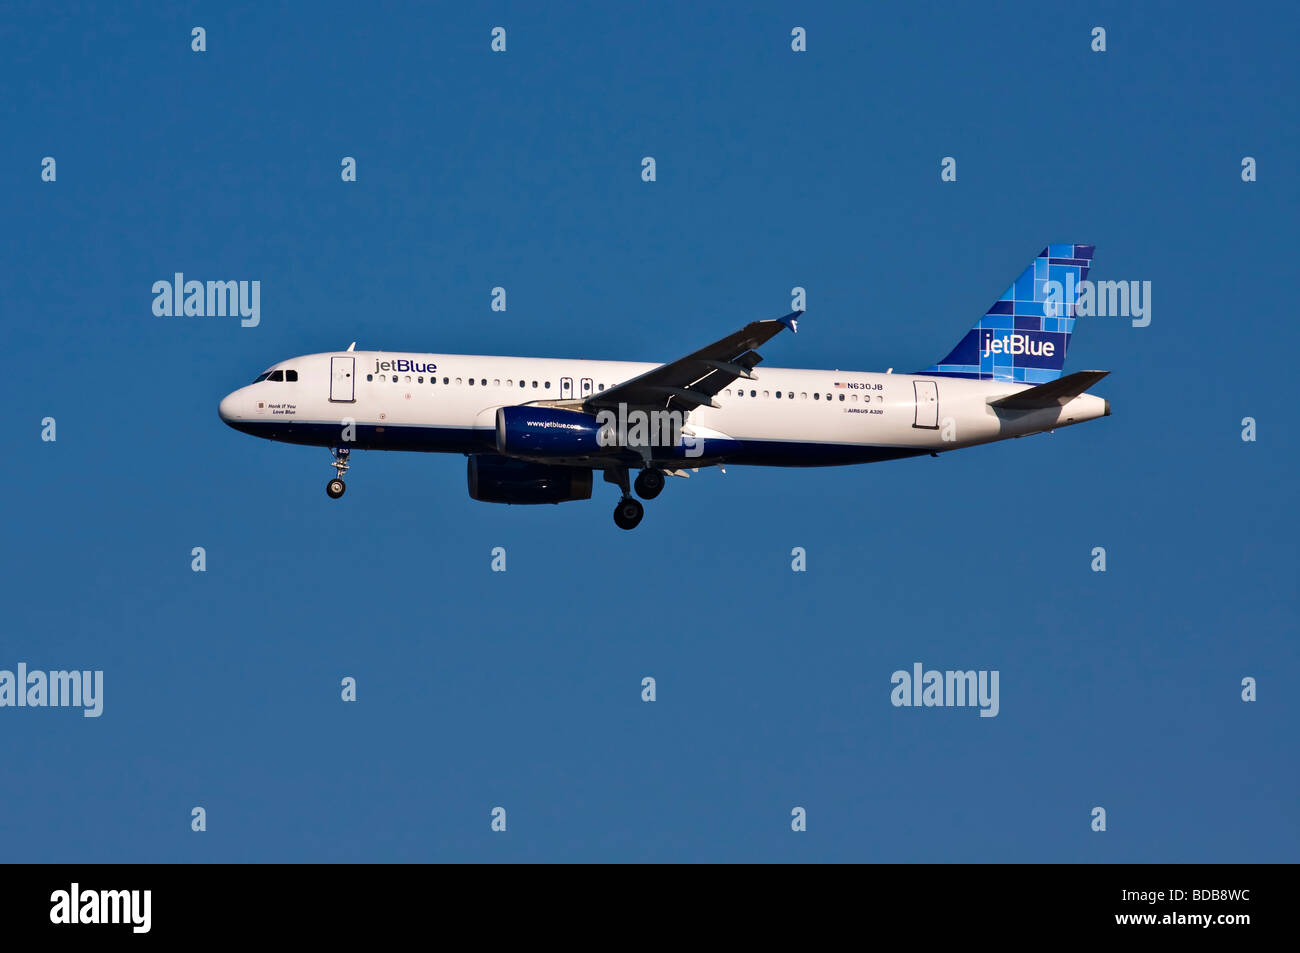 jetBlue Airbus A320 in flight with landing gear down.  'Honk If You Love Blue' written on the nose. Stock Photo